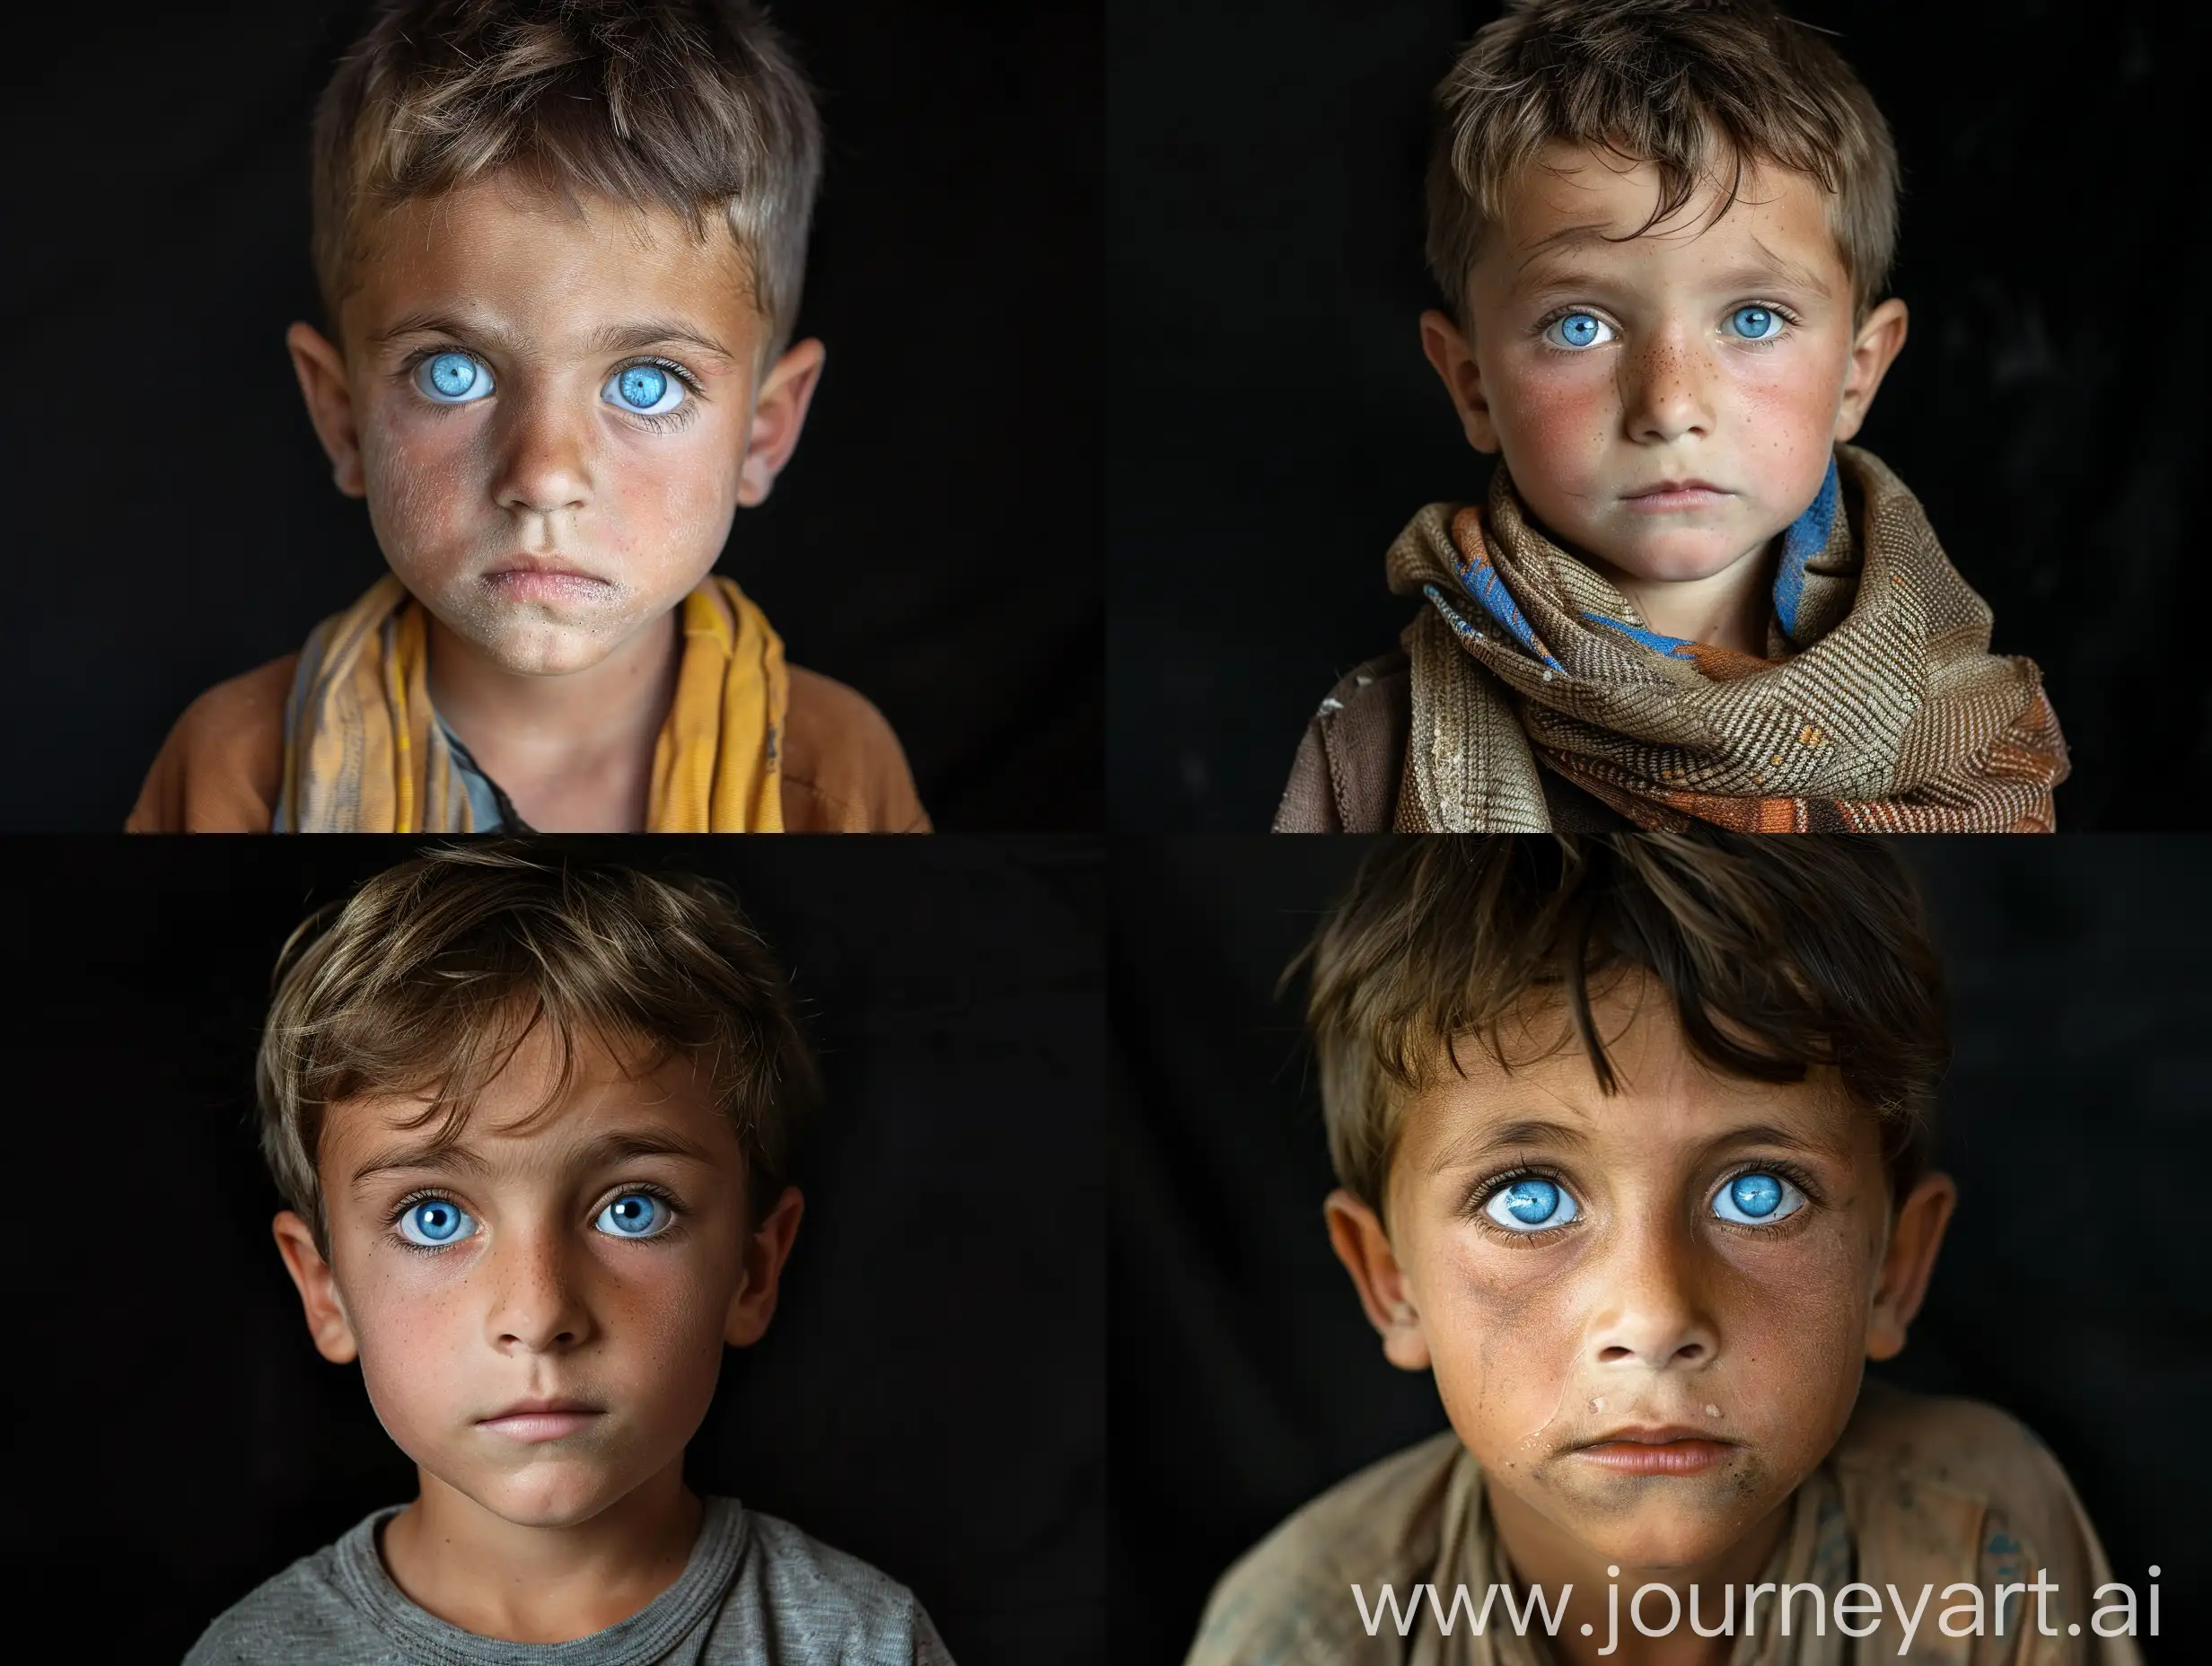 a portrait photo of poor kid with blue eyes isolated with black background